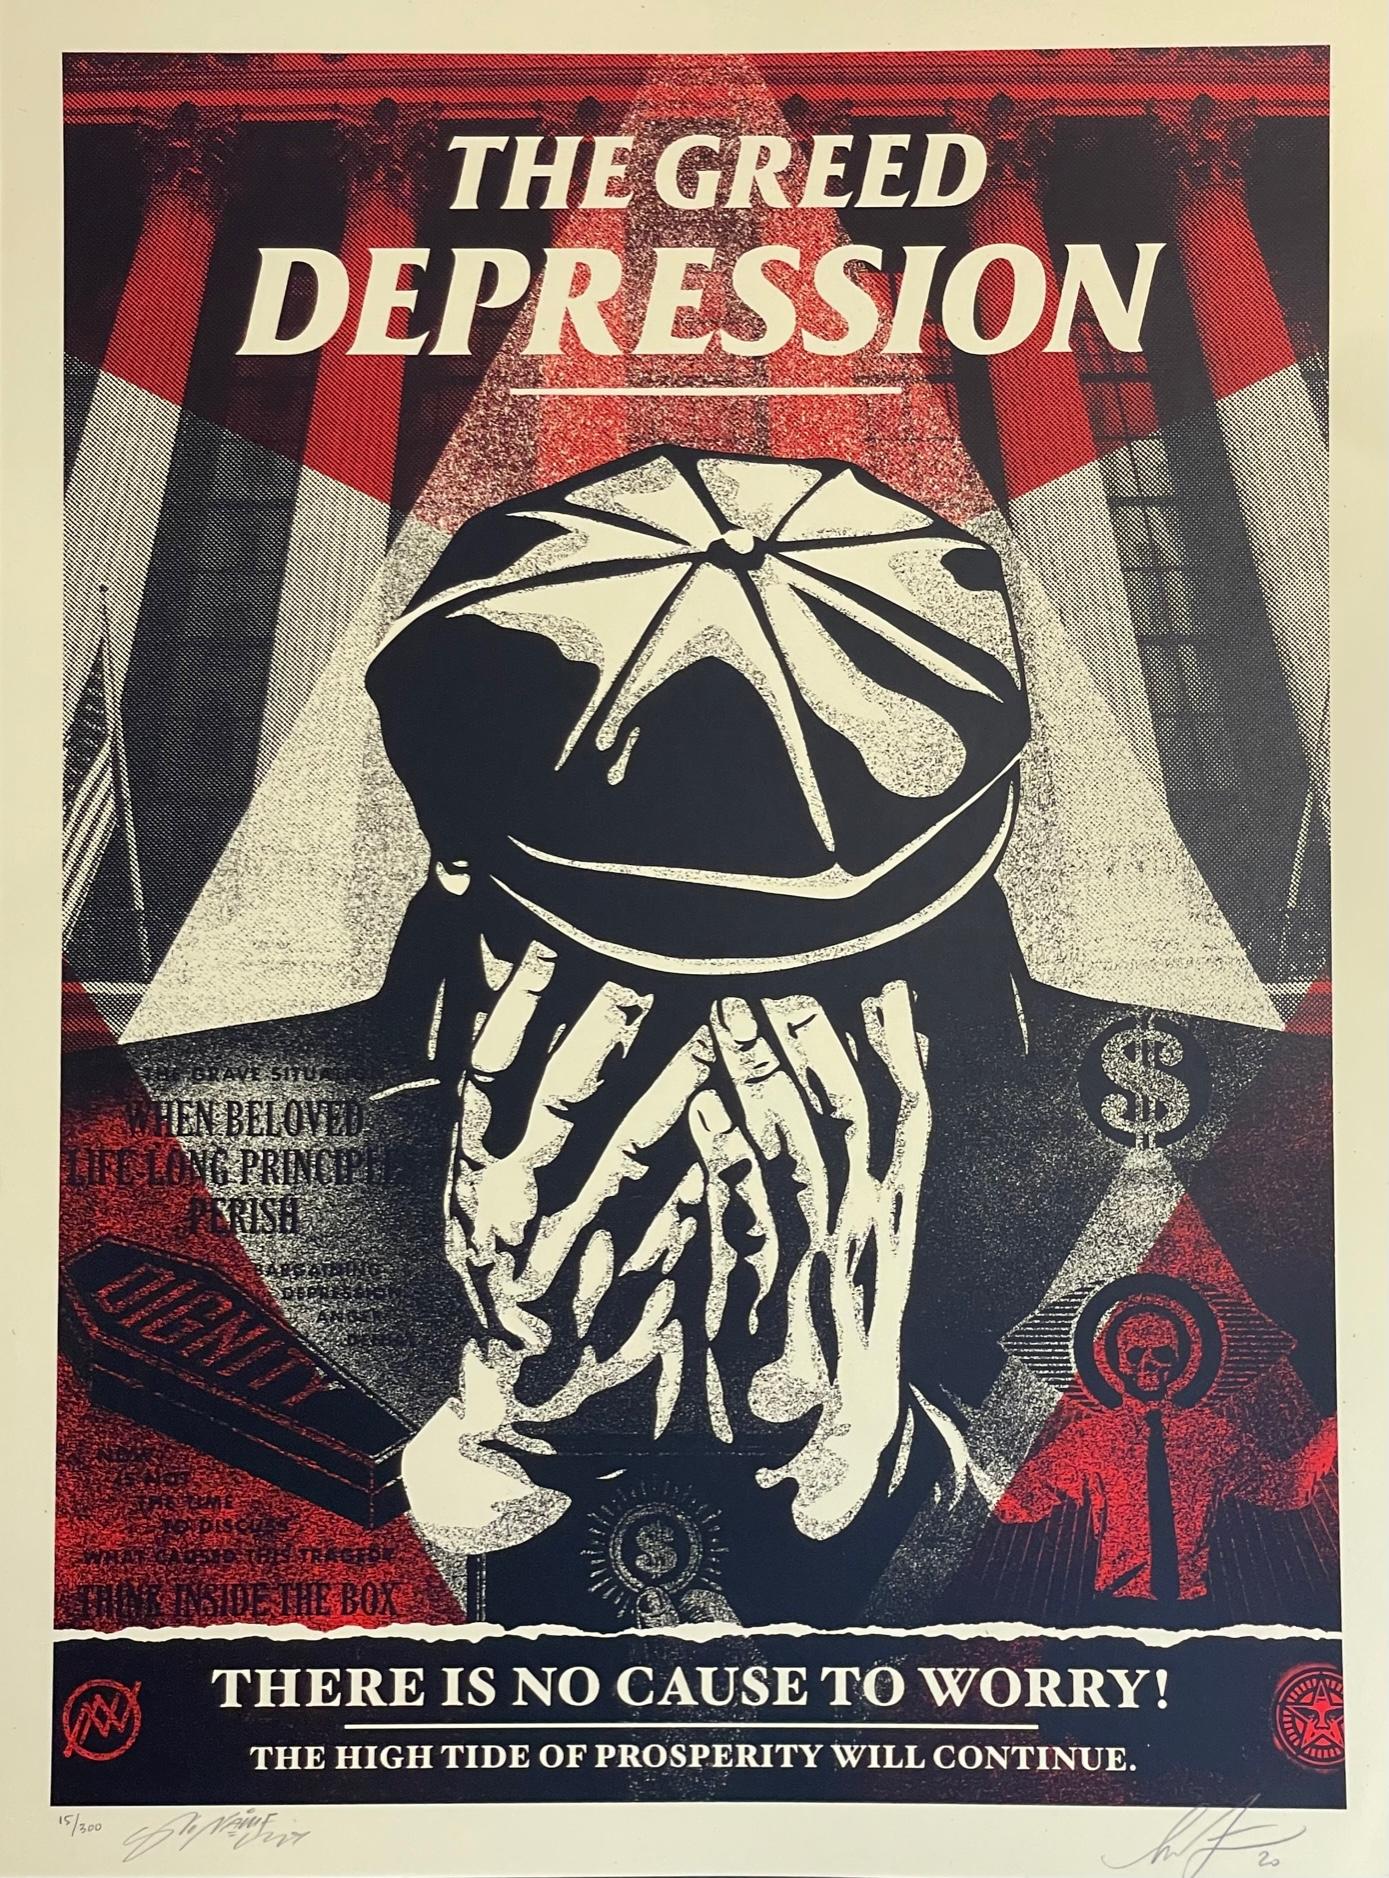 THE GREED DEPRESSION
18 inches by 24 inches
Edition of  15/300
Silkscreen print

Signed and Numbered by the artist in pencil, Shepard Fairey.